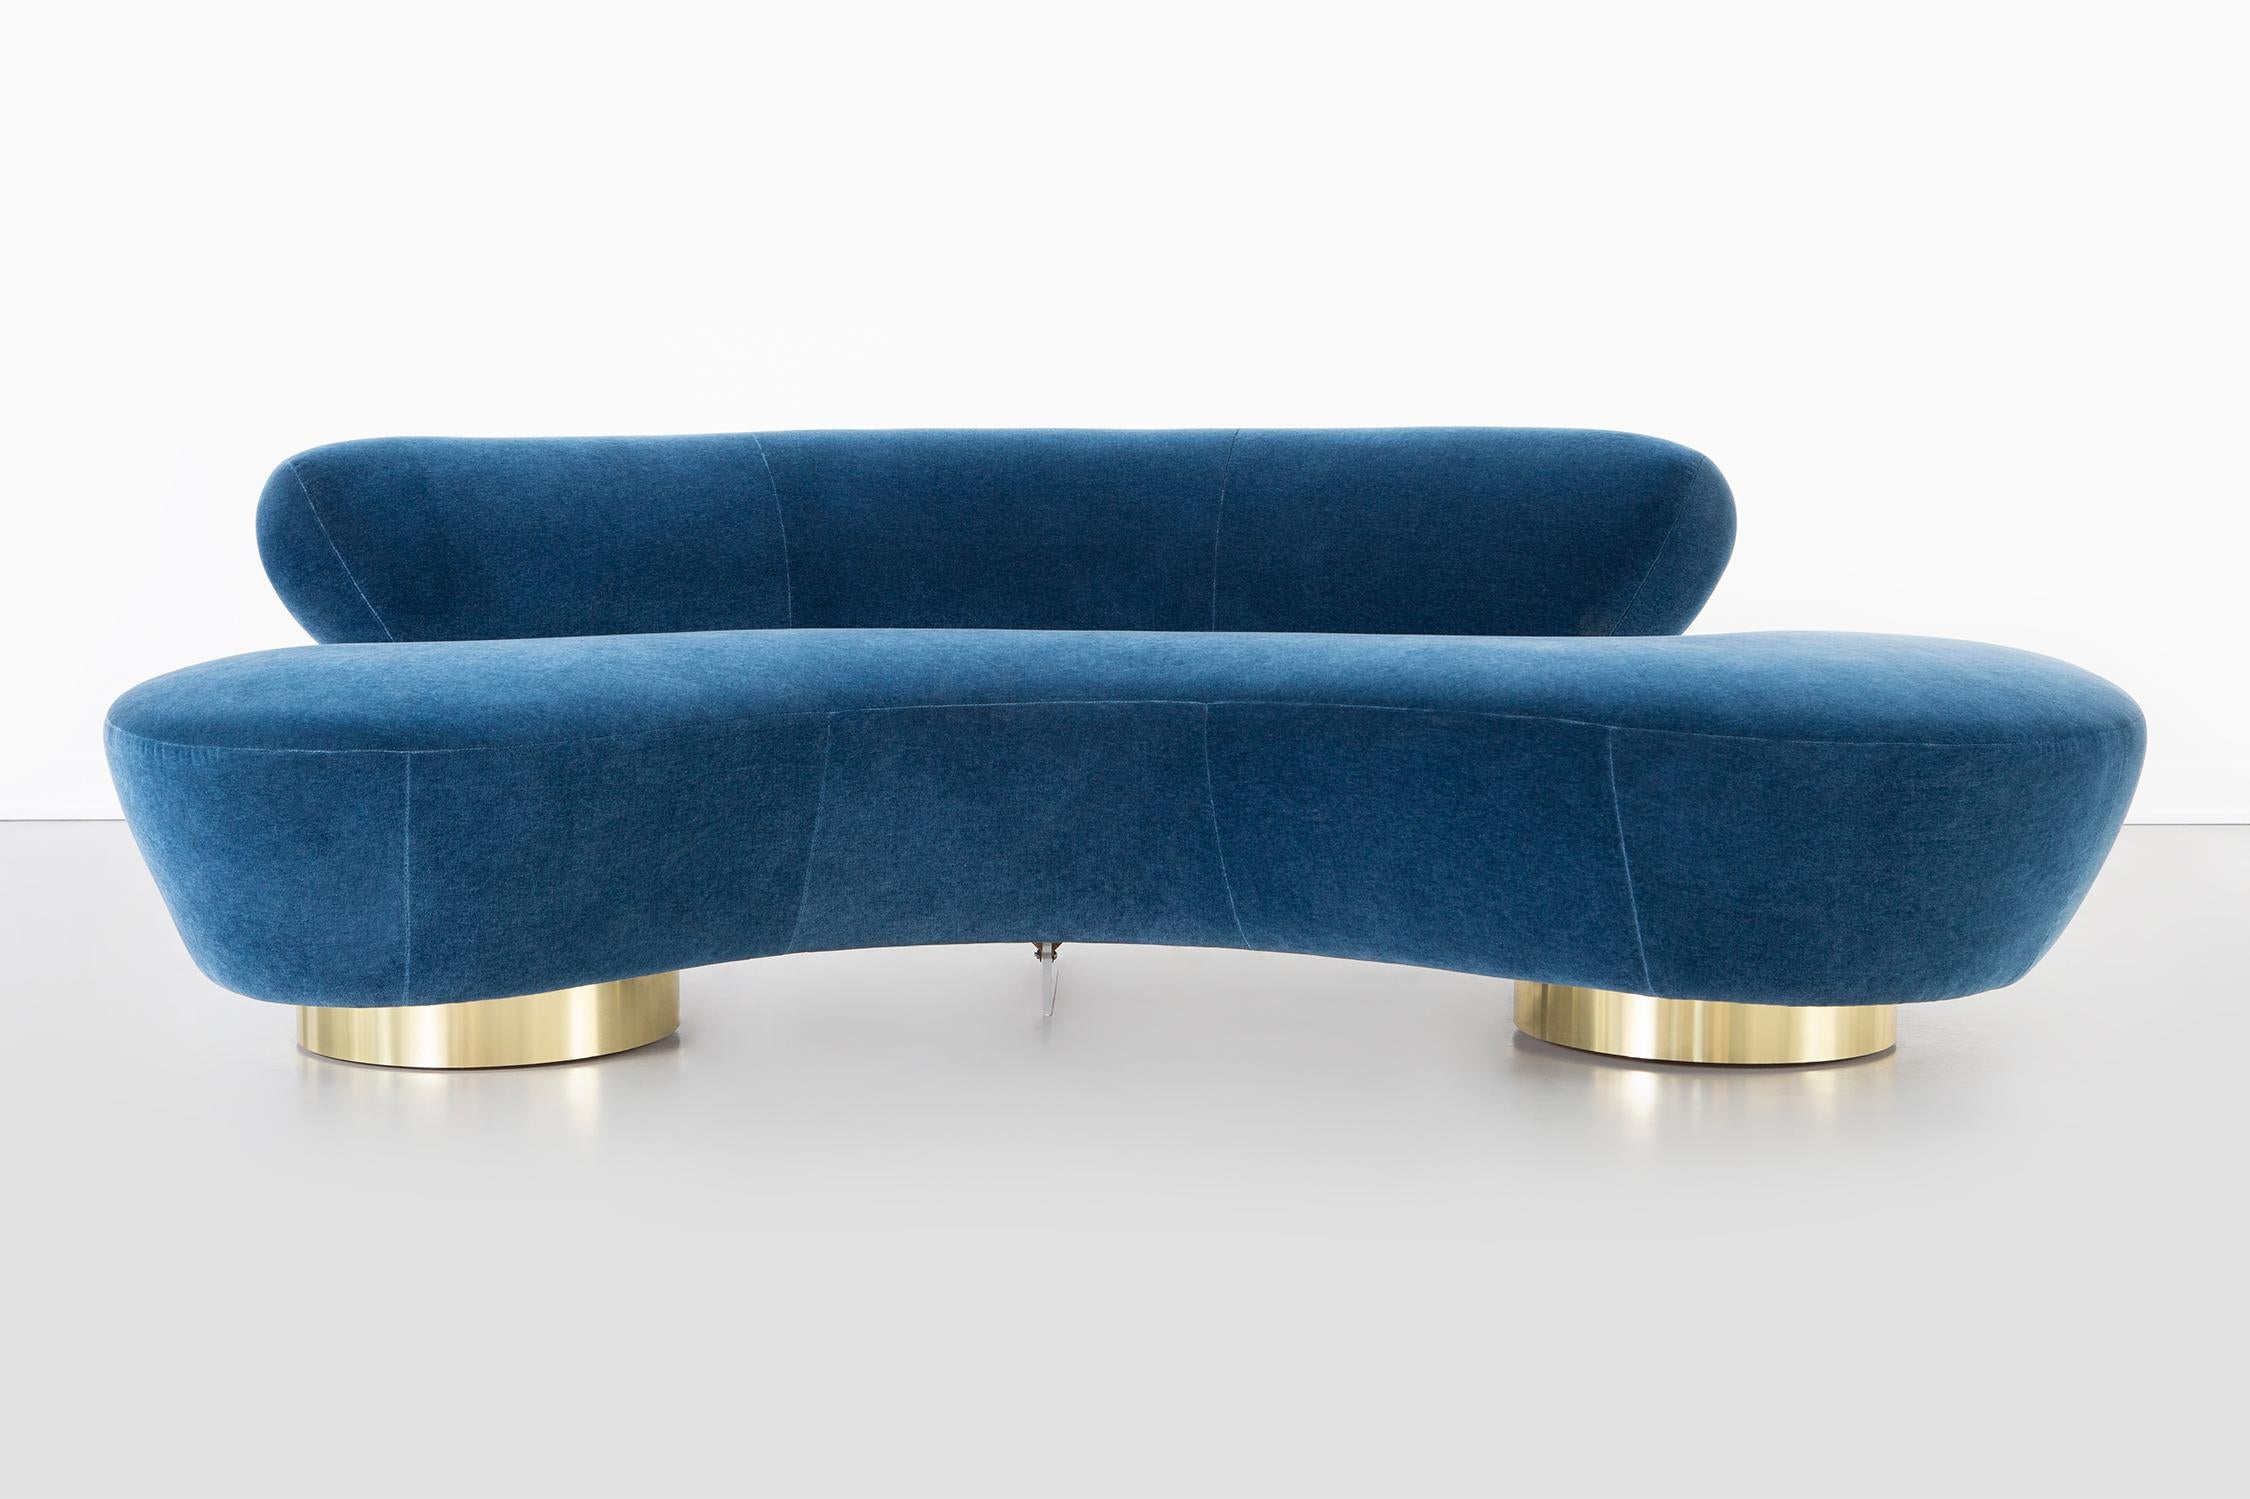 American Set of Vladimir Kagan for Directional Cloud Sofas Newly Reupholstered in Mohair